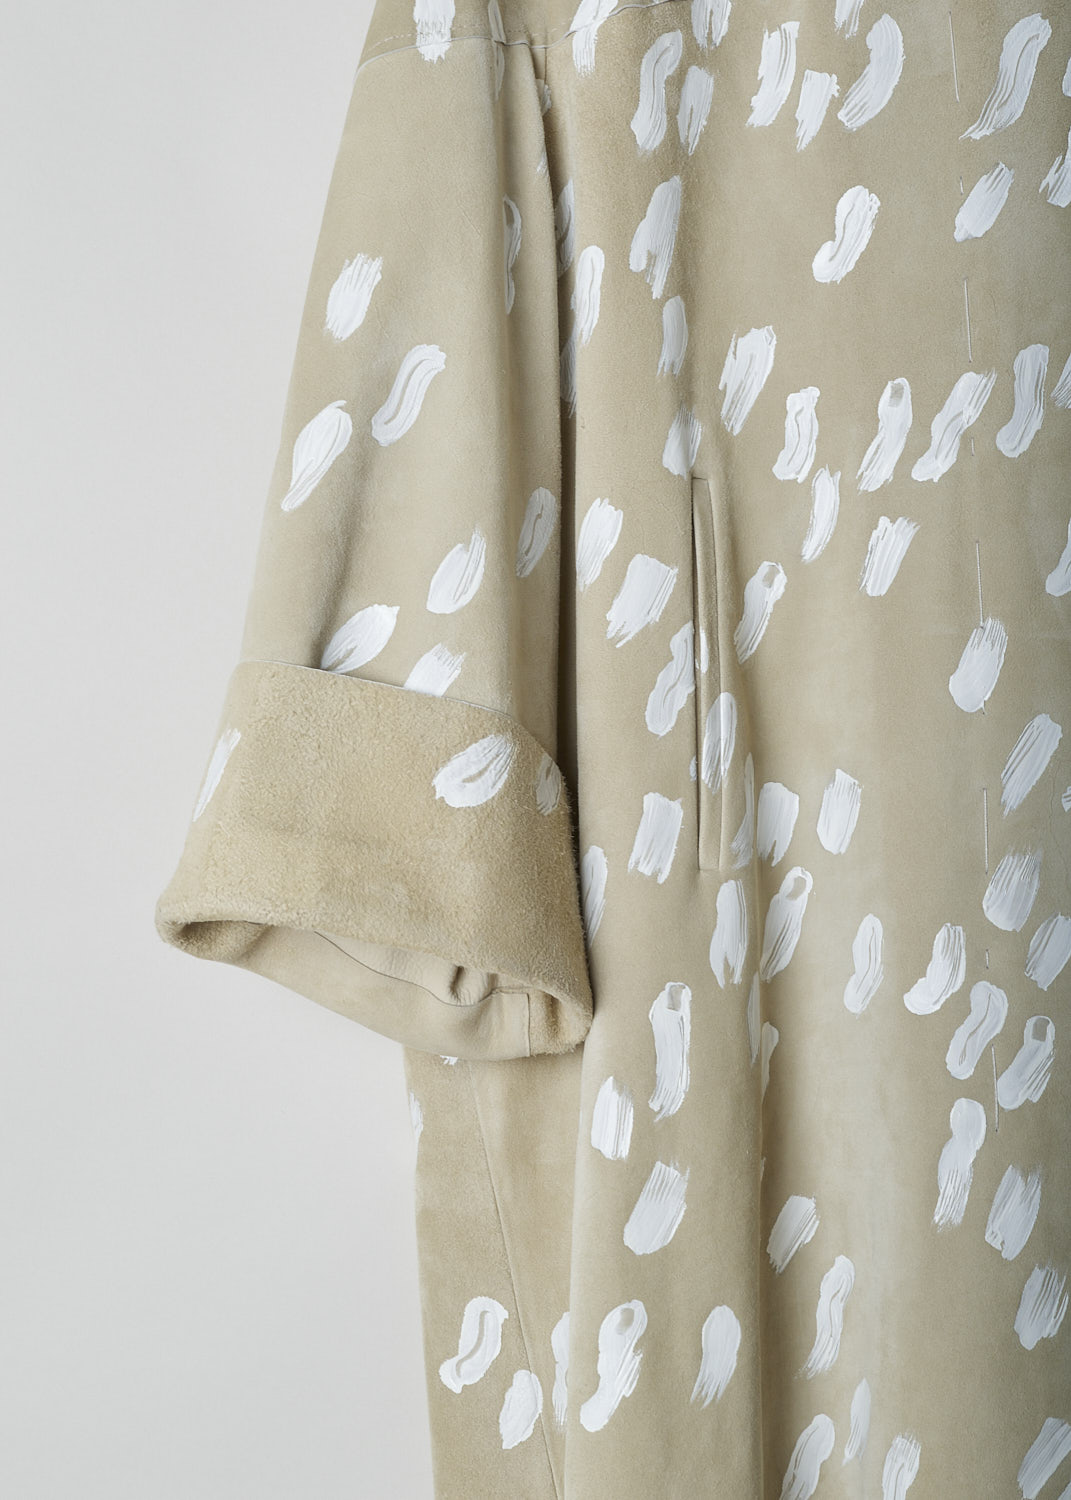 Marni, Beige duster coat with playful hand painted print, SPMX0027Y2_LV835_ROW13, Beige, Print, Detail, This beige duster coat is playfully decorated with hand painted brush strokes. The coat has a cape collar that drapes over the shoulders. It comes with a single button closure. In the front two slash pockets can be found. The 3/4 sleeves have folded over cuffs.